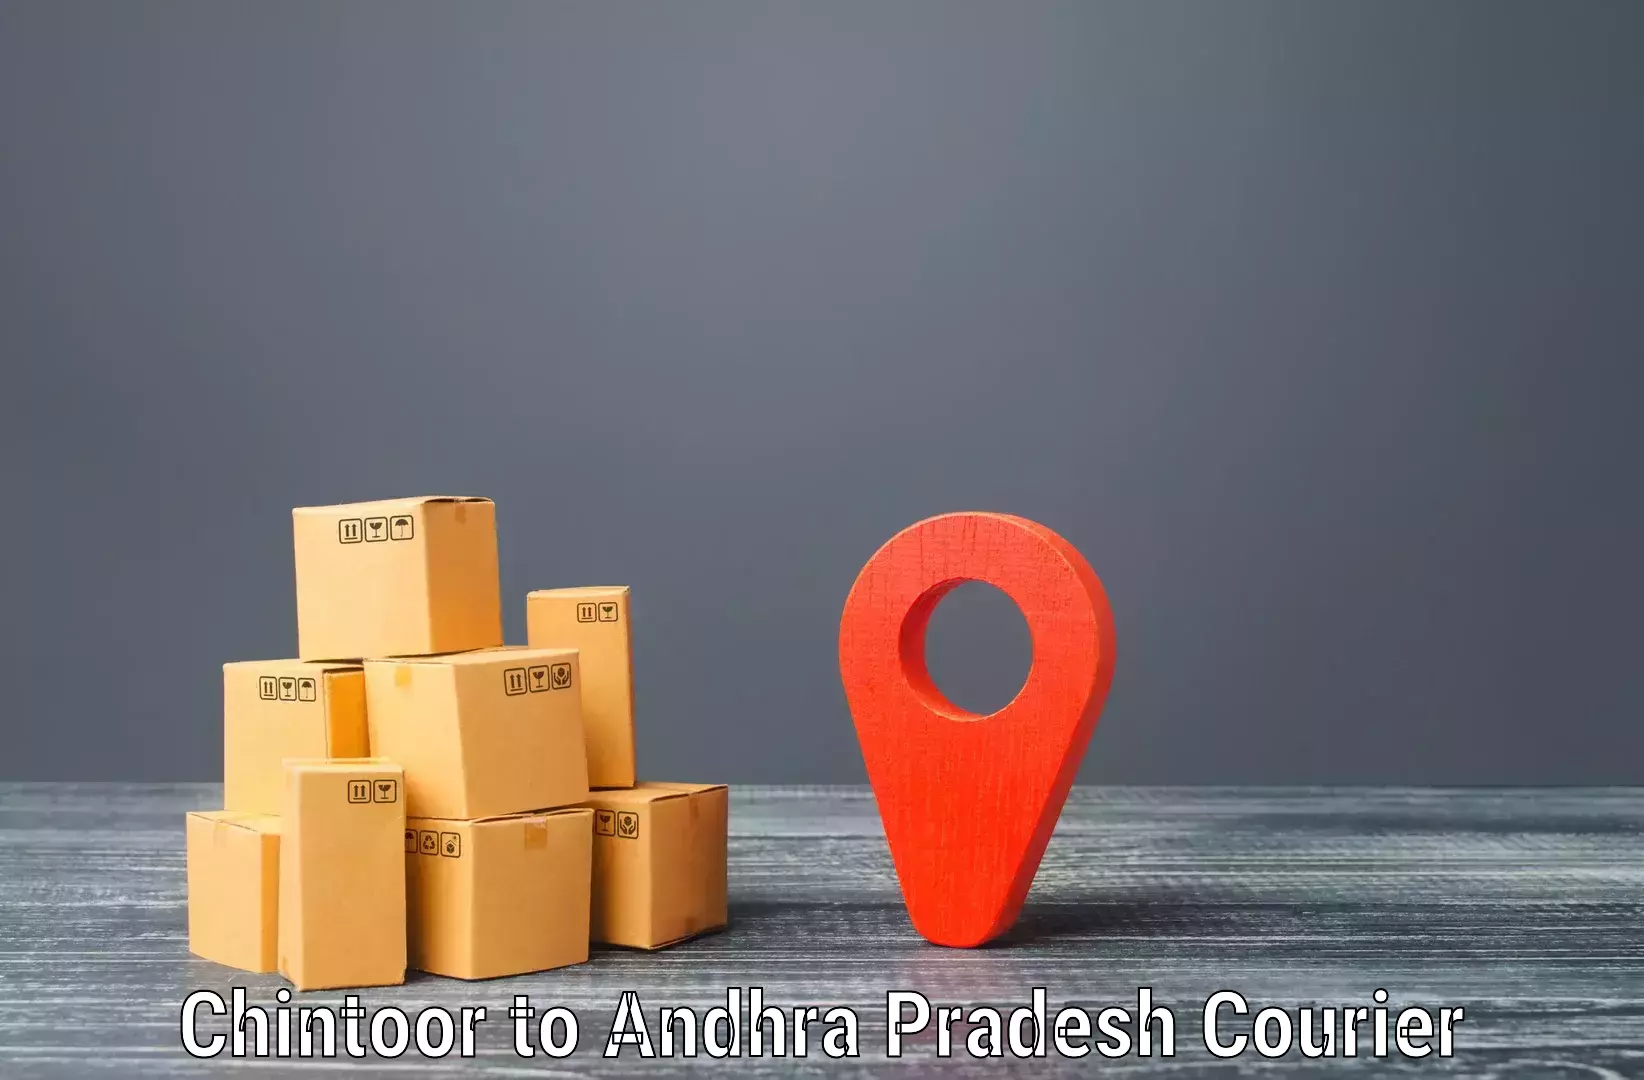 Large package courier Chintoor to Tirupati